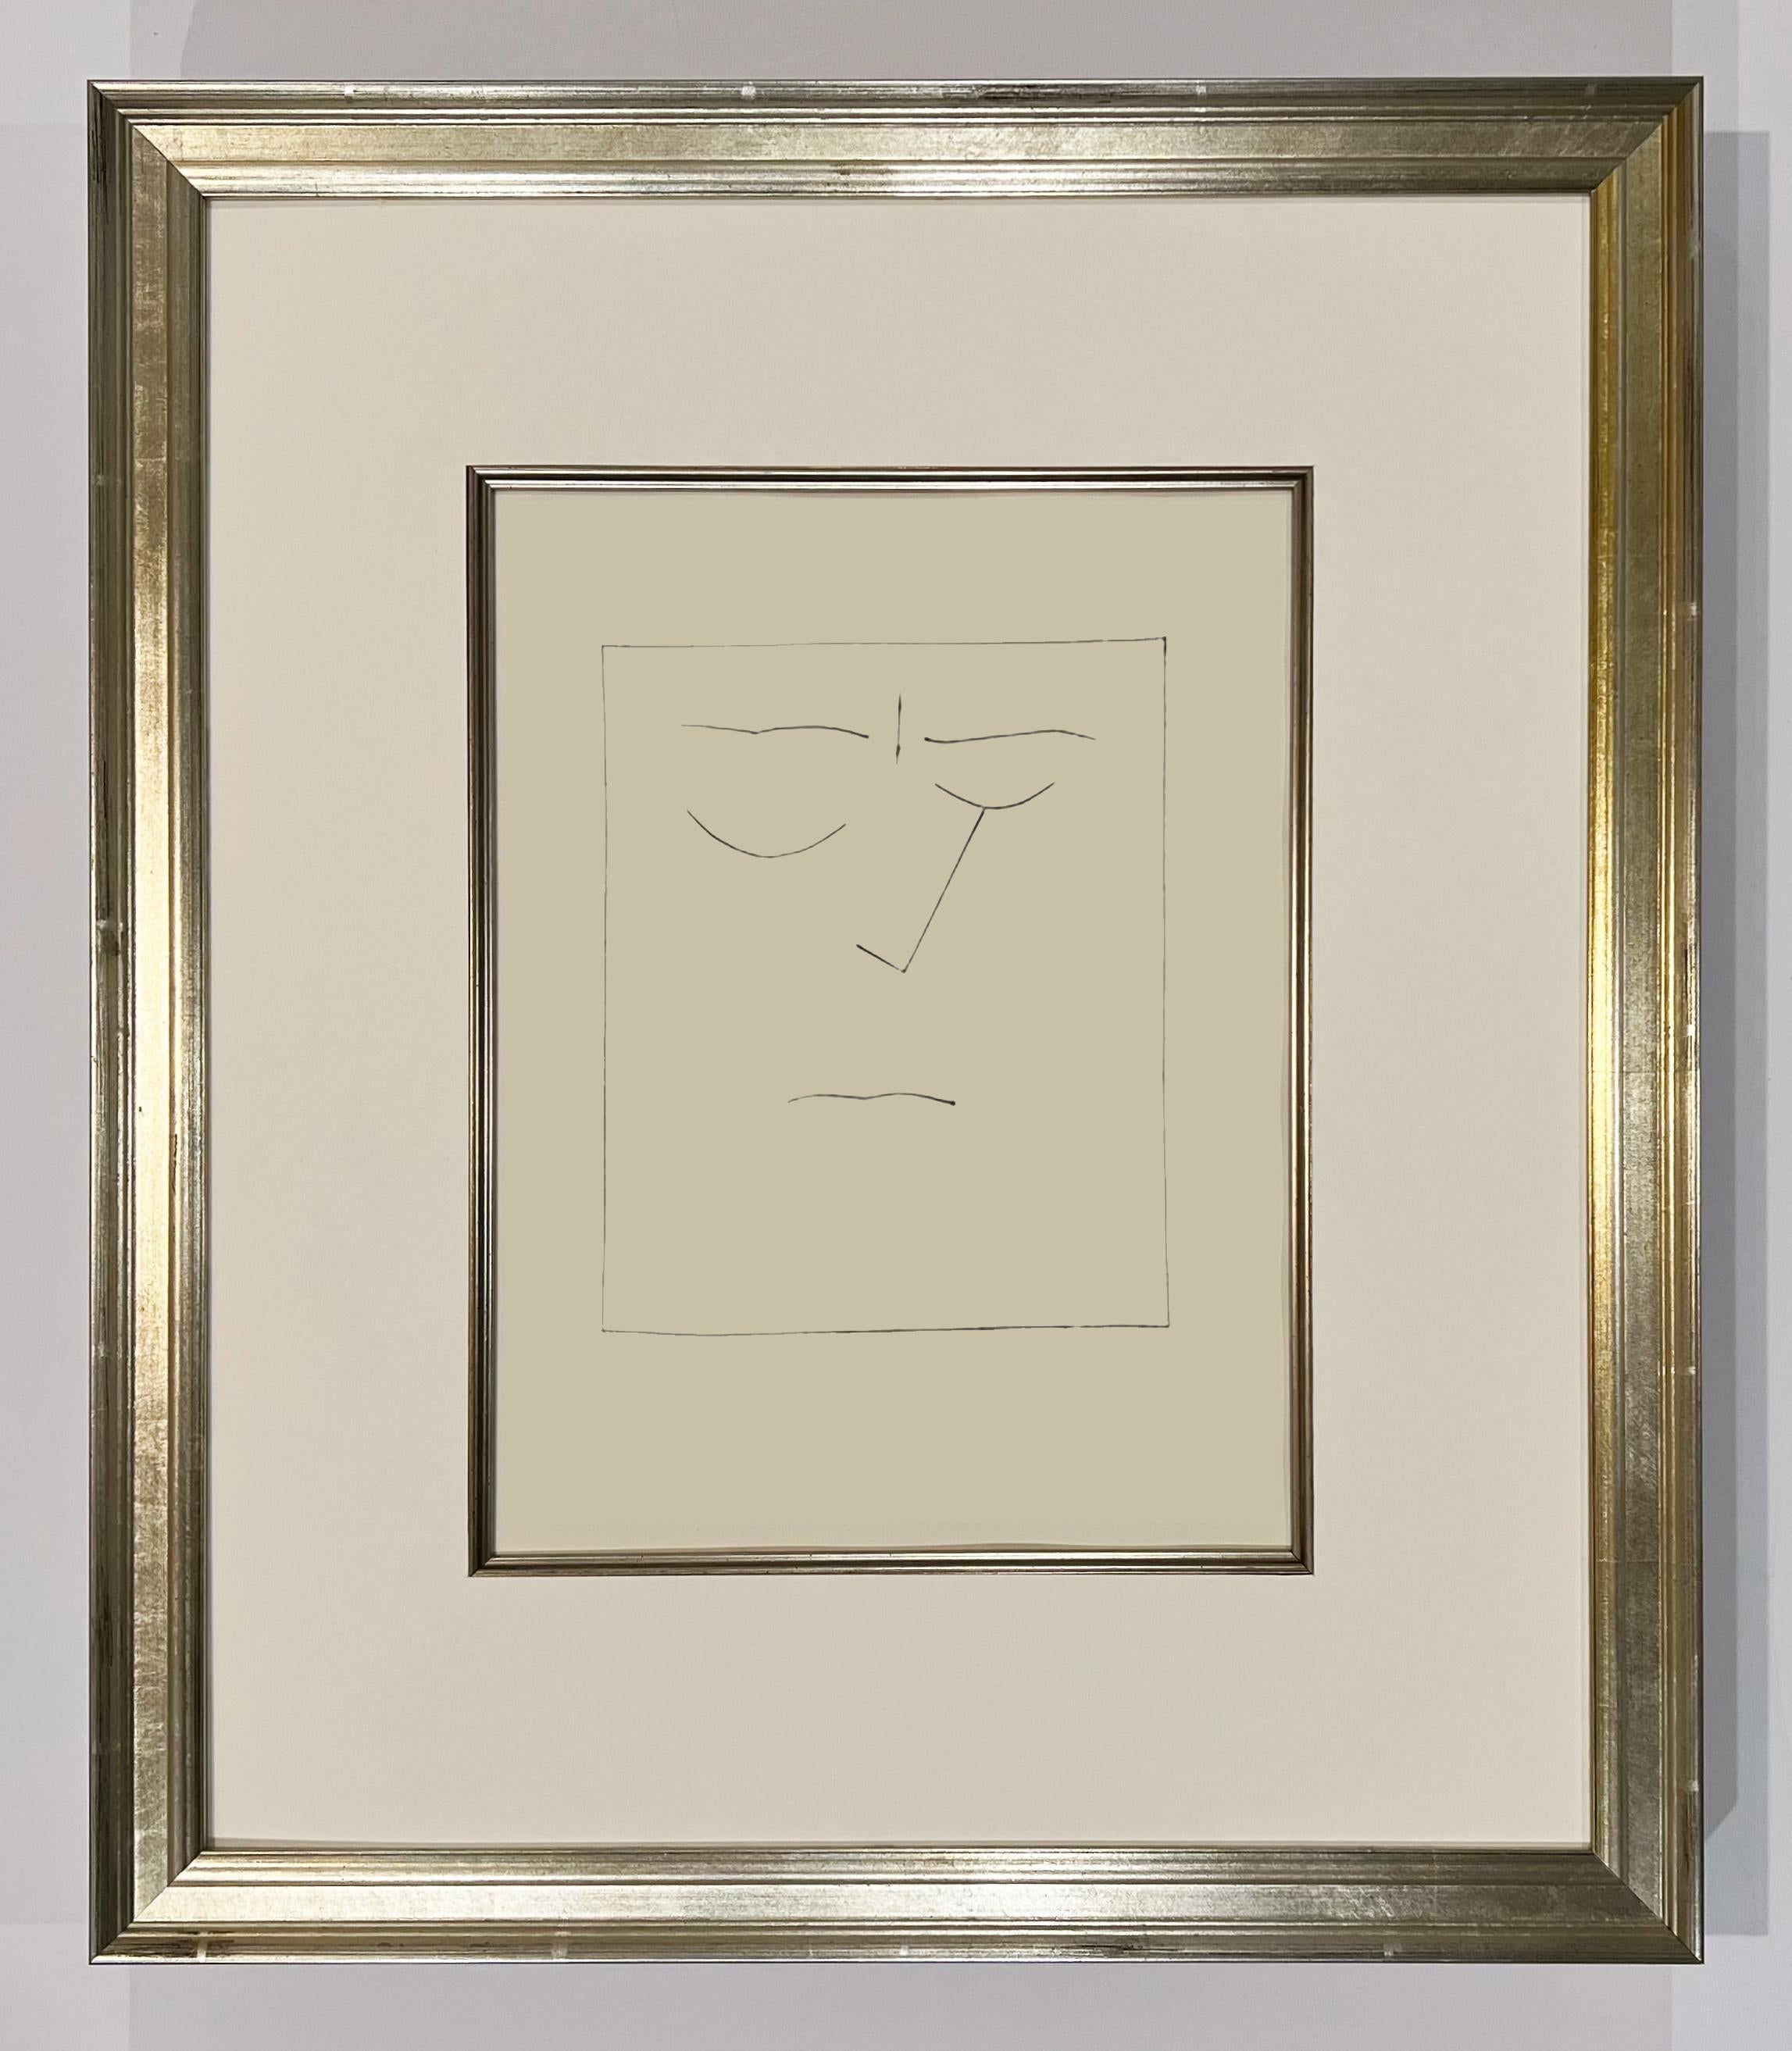 Square Head of a Man with Closed Eyes (Plate VIII), from Carmen - Print by Pablo Picasso